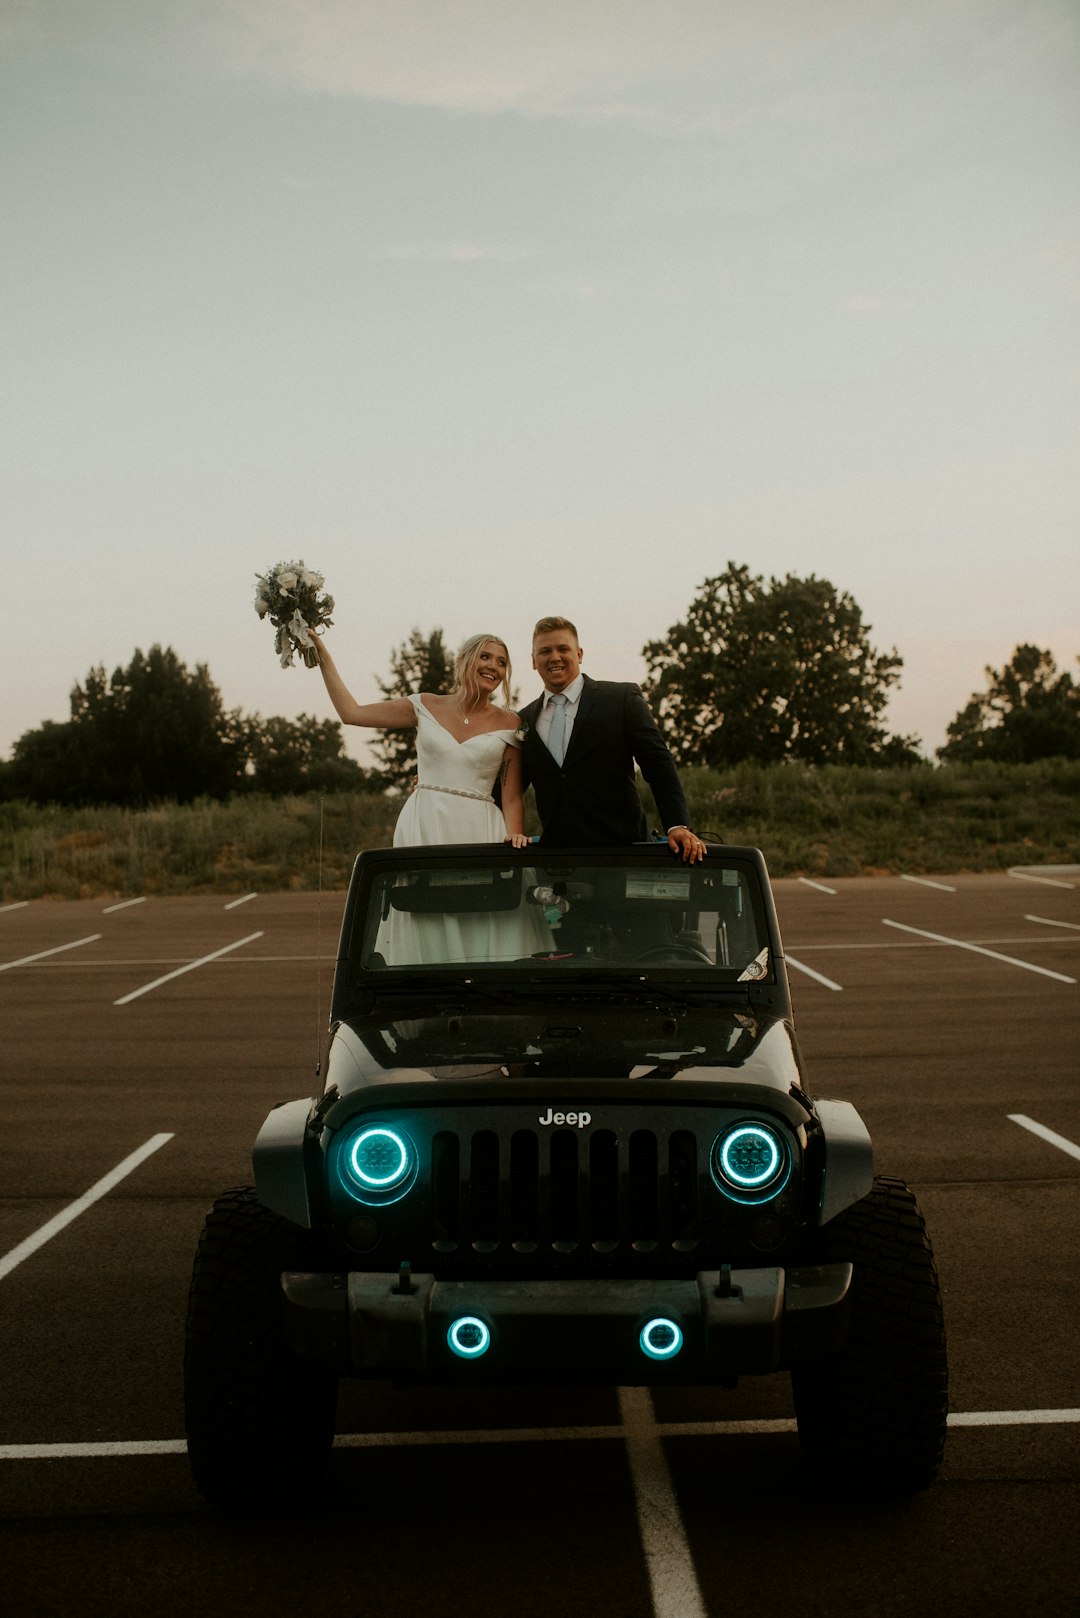 man and woman riding on green and black jeep wrangler